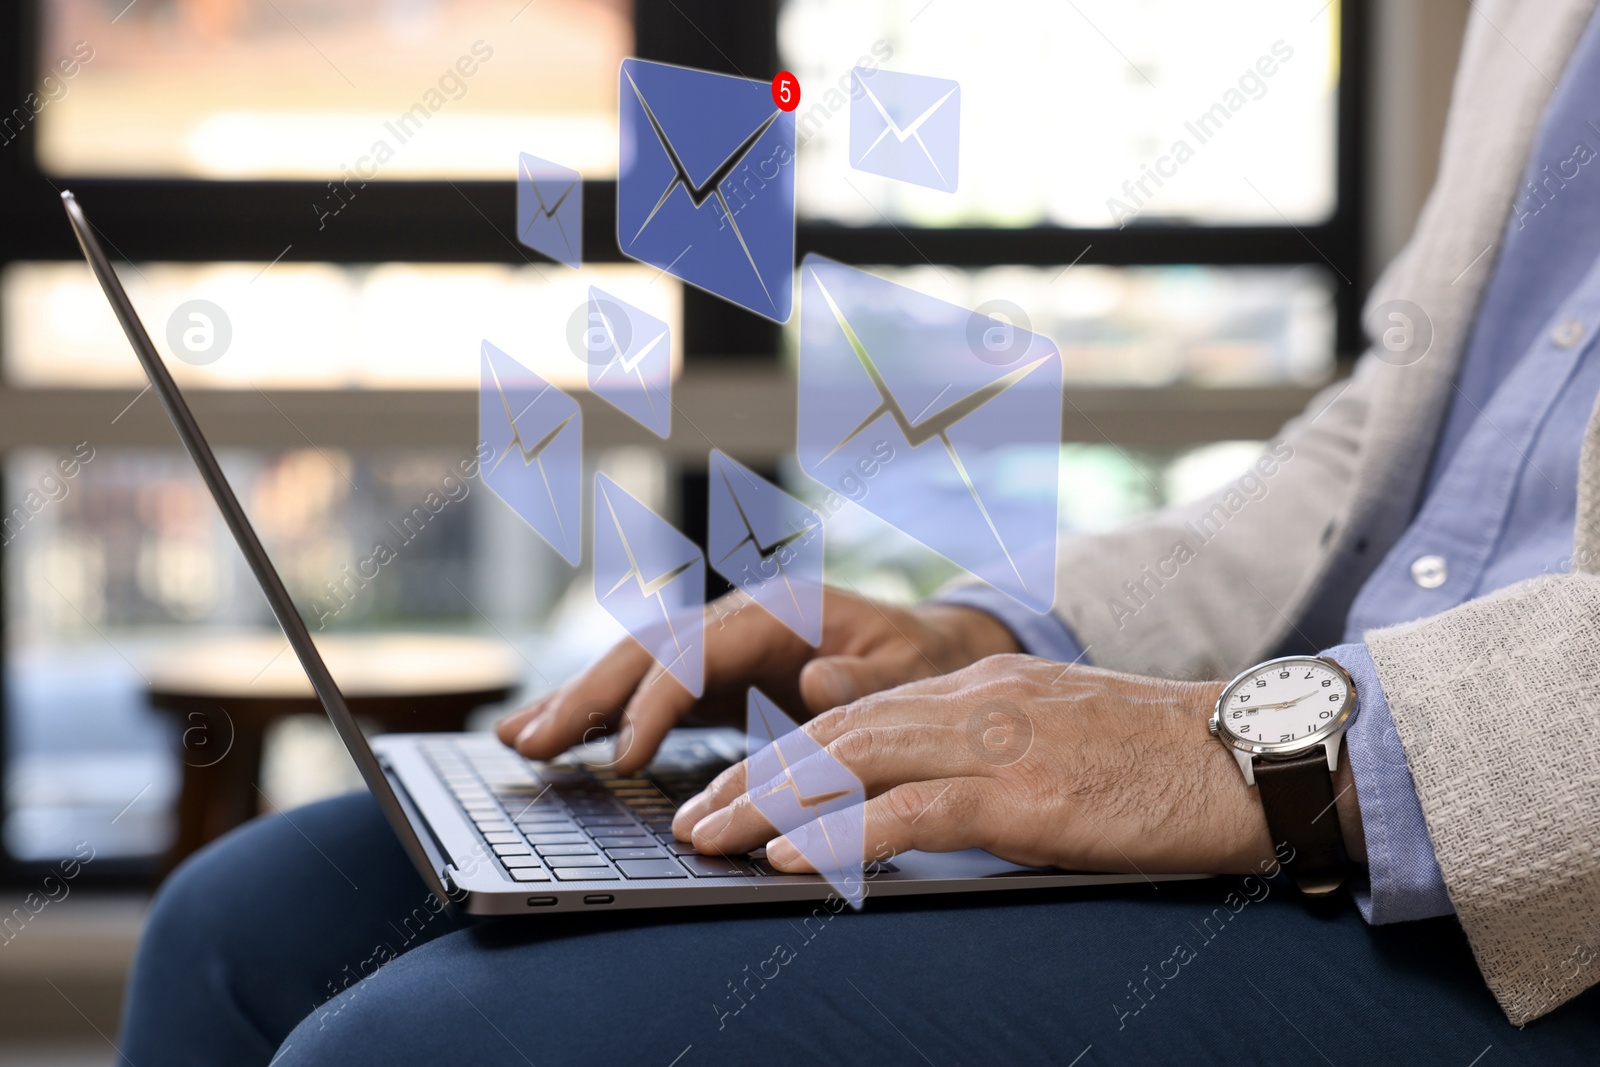 Image of Man typing on laptop indoors, closeup. Many illustrations of envelope as incoming messages over device